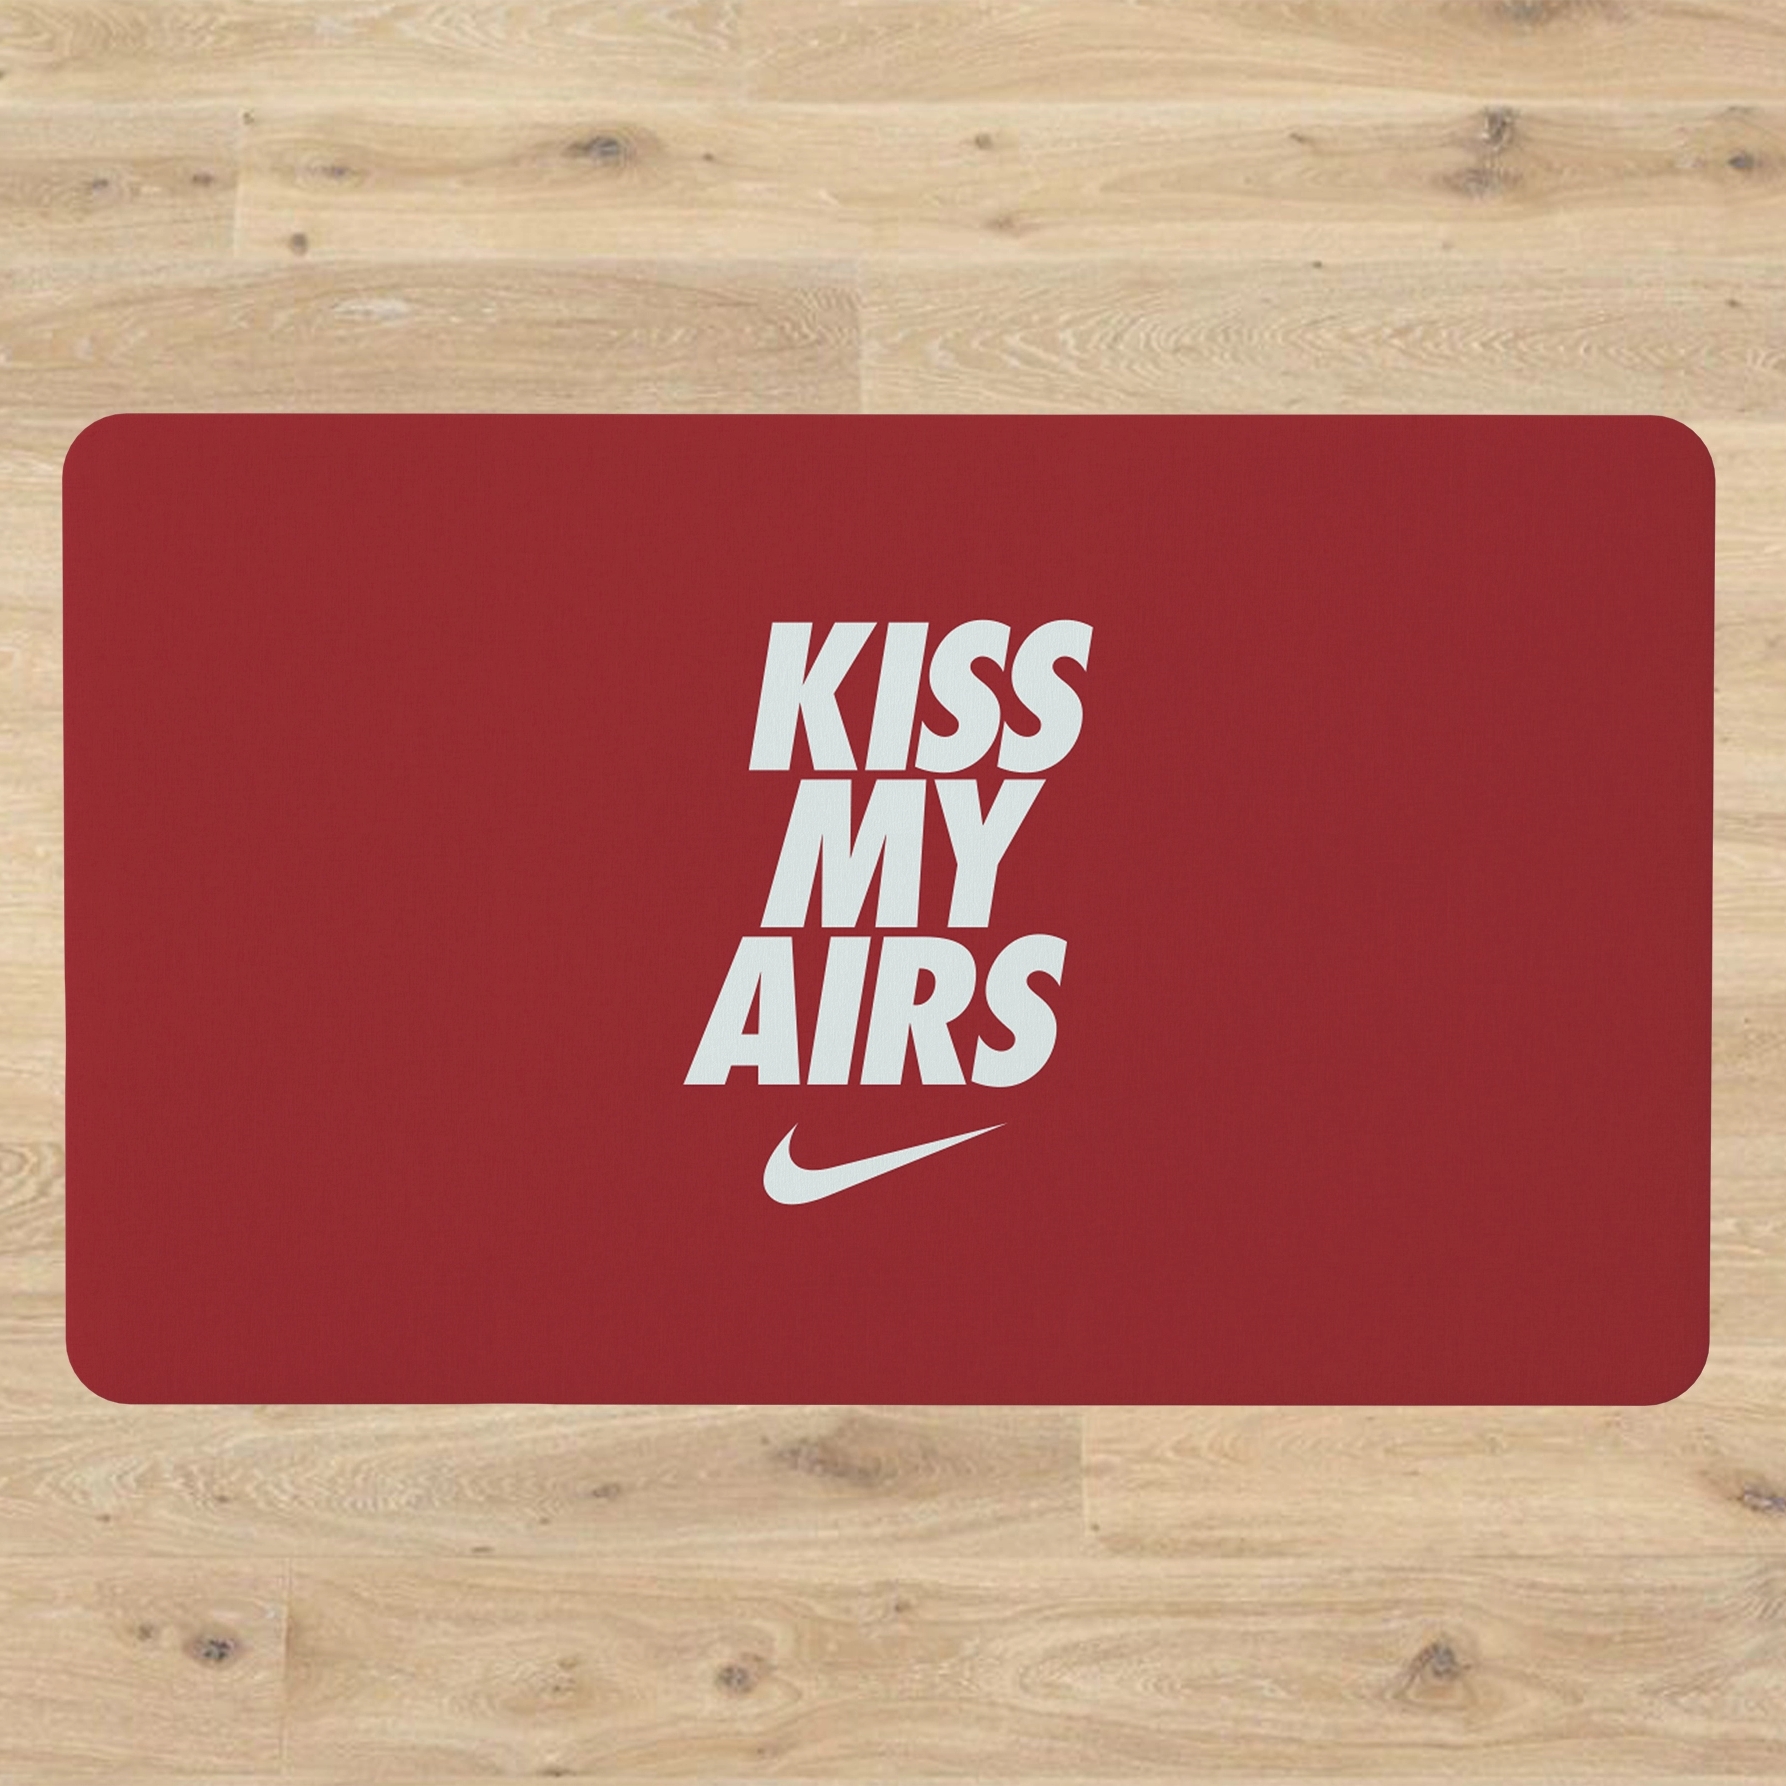 Kiss My Airs Doormat Nike Style 60X40 